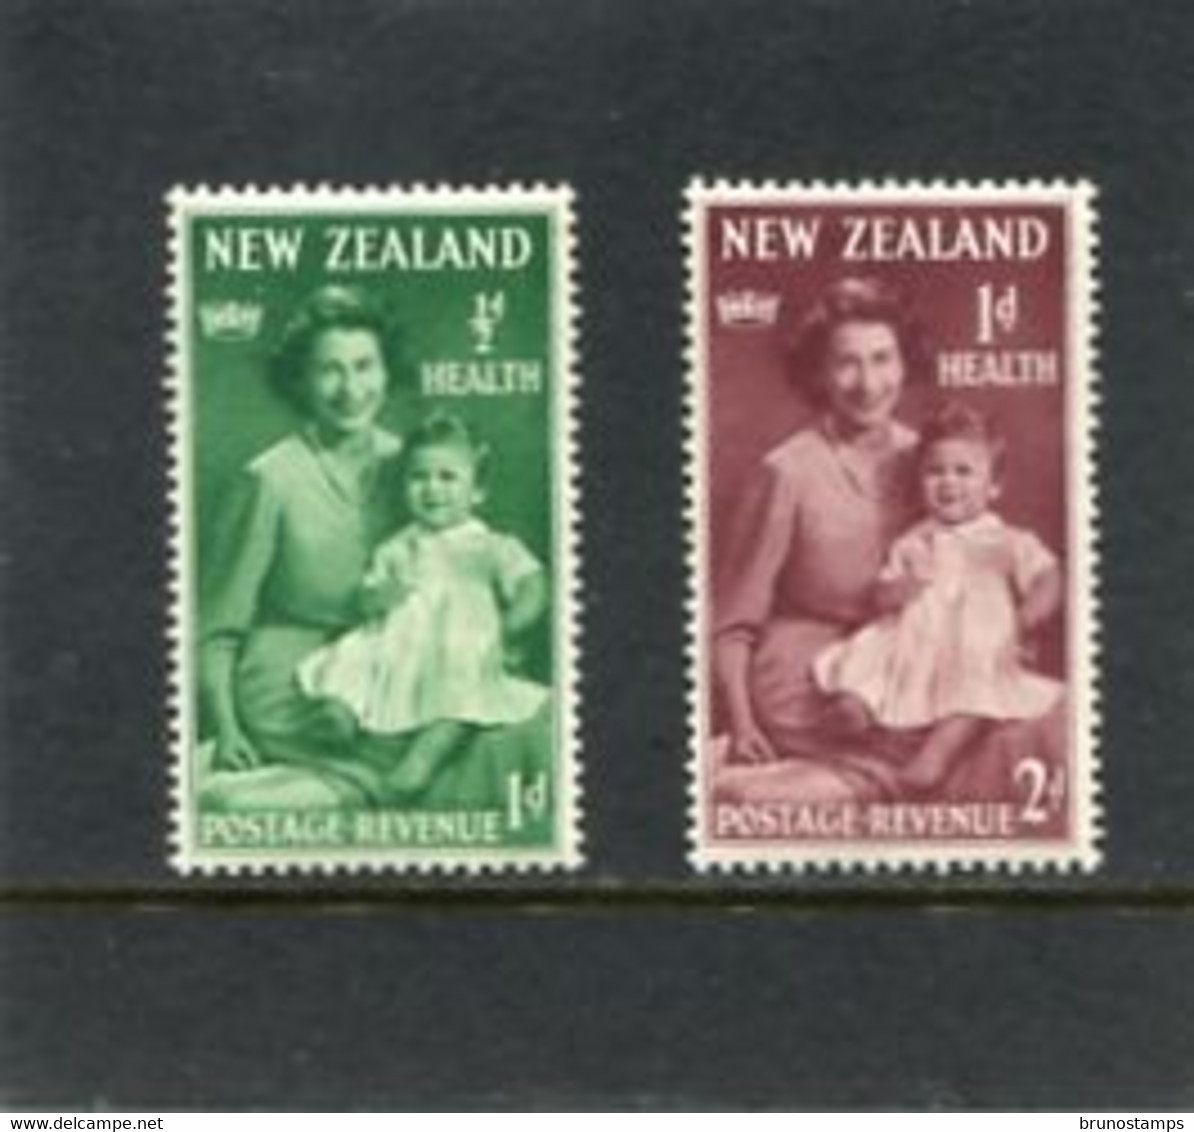 NEW ZEALAND - 1950  HEALTH STAMPS  SET  MINT NH - Nuevos